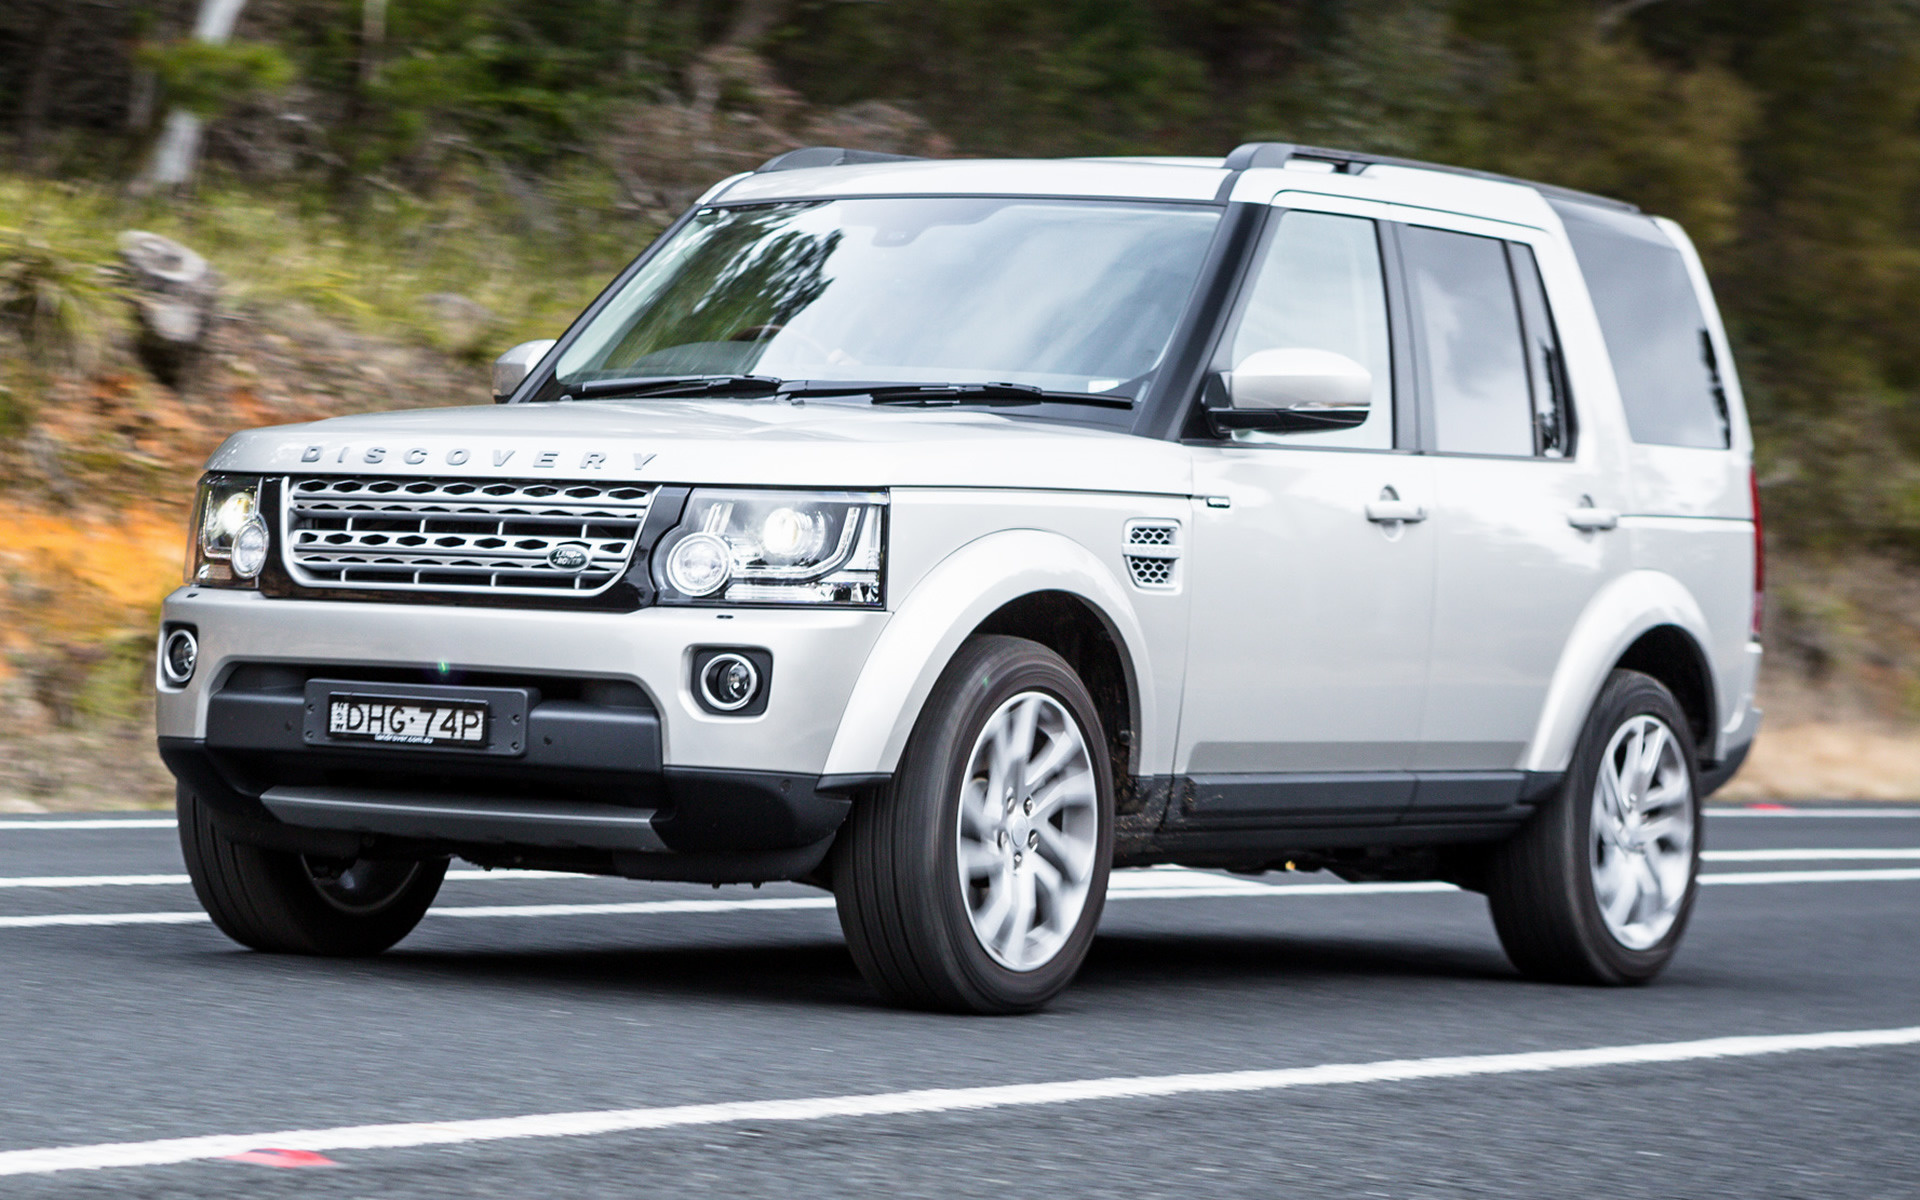 Land Rover Discovery HSE (2014) AU Wallpapers and HD Images - Car Pixel
 2014 Land Rover Discovery Wallpaper